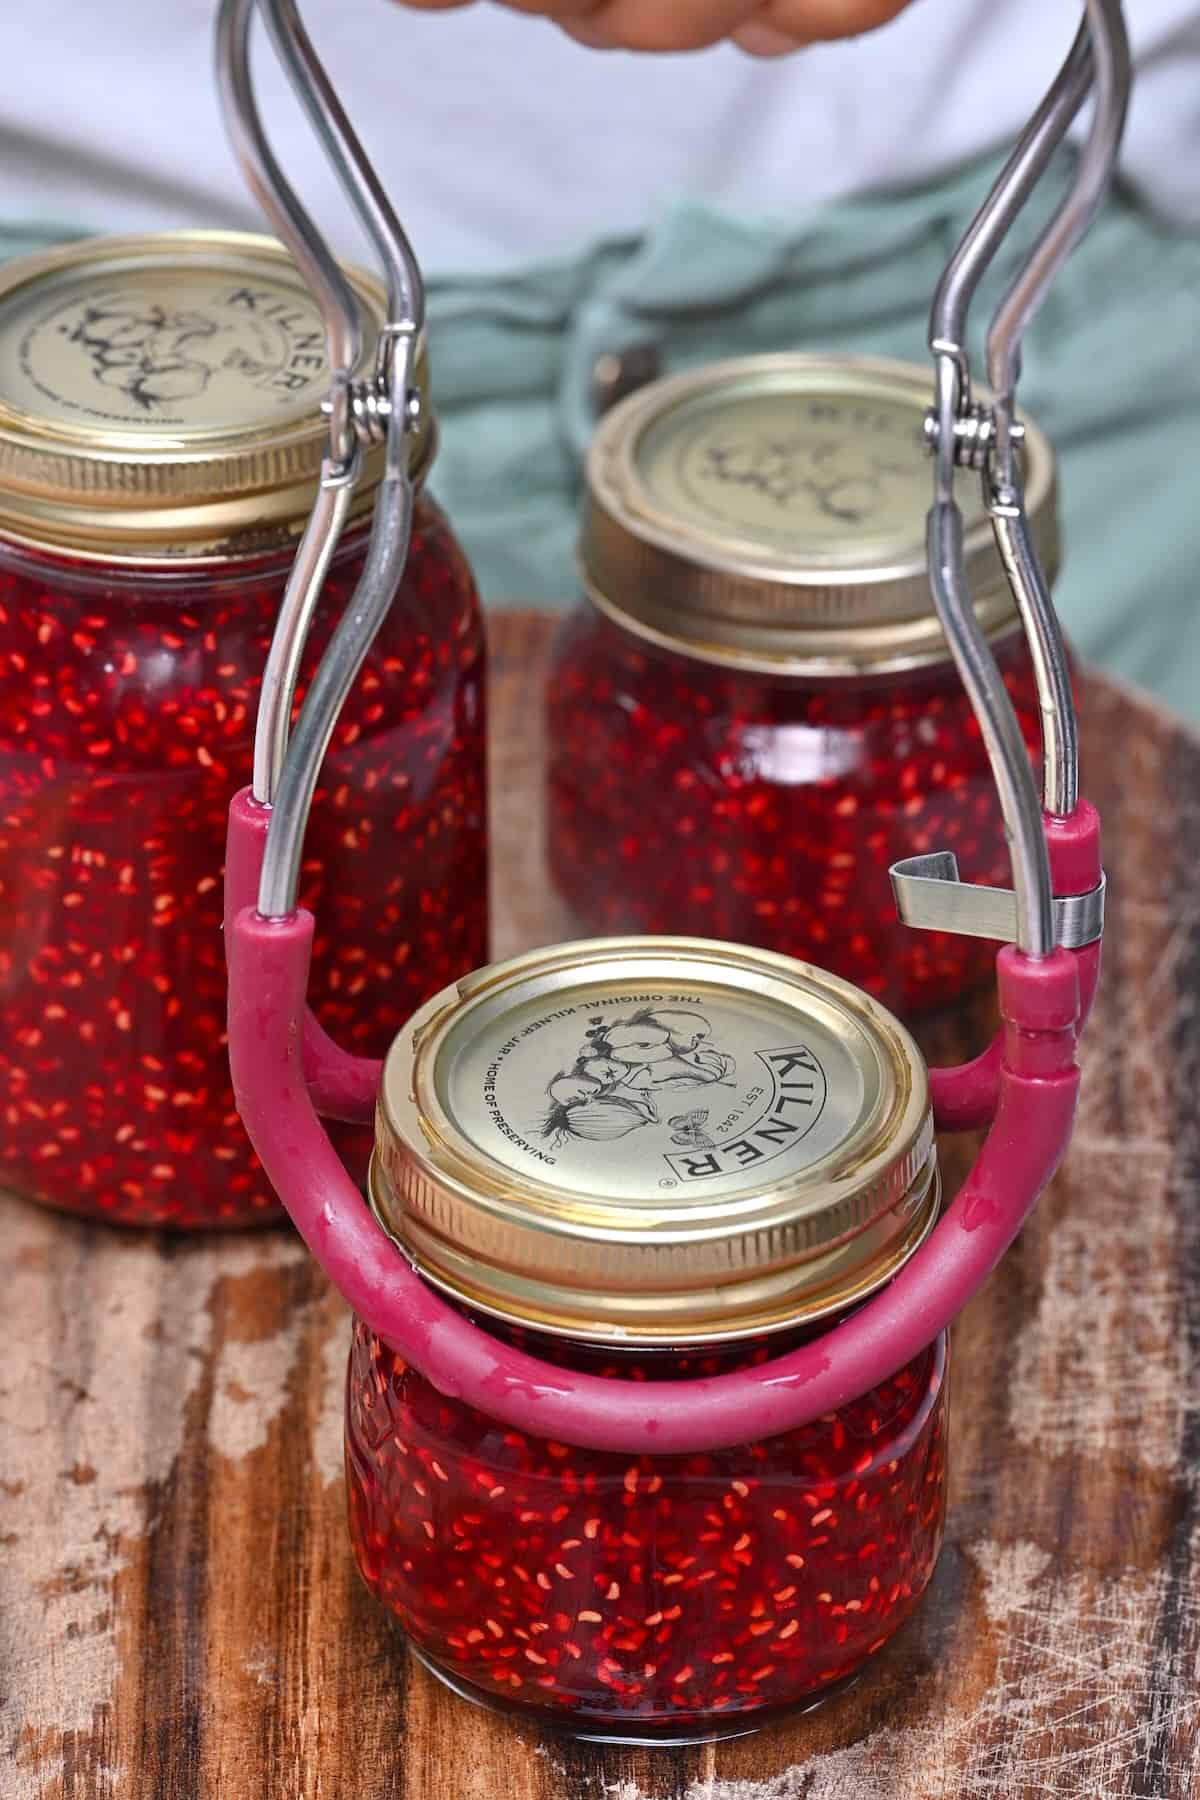 Placing a hot jar with jam on a wooden board